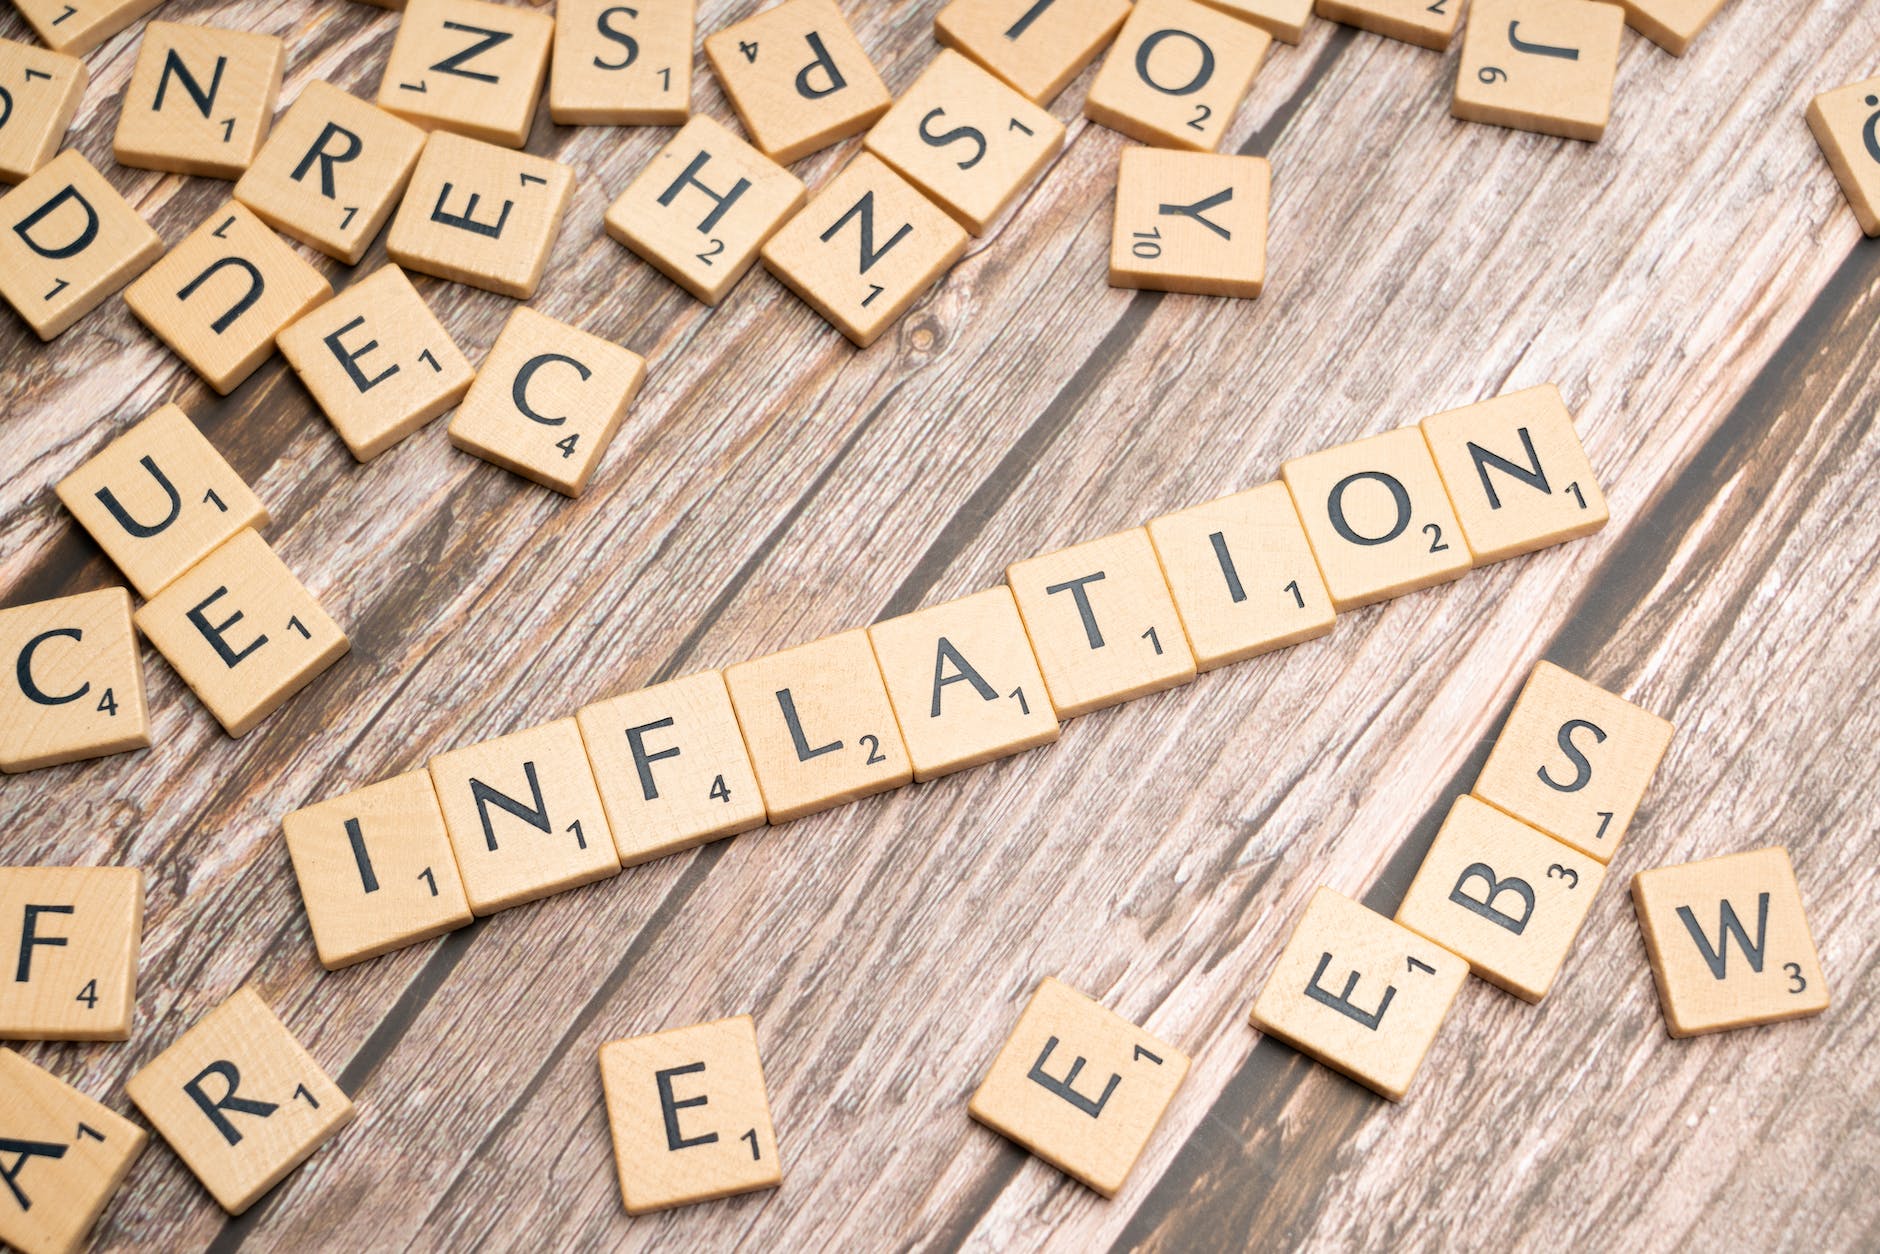 the word inflation is spelled out in scrabble letters